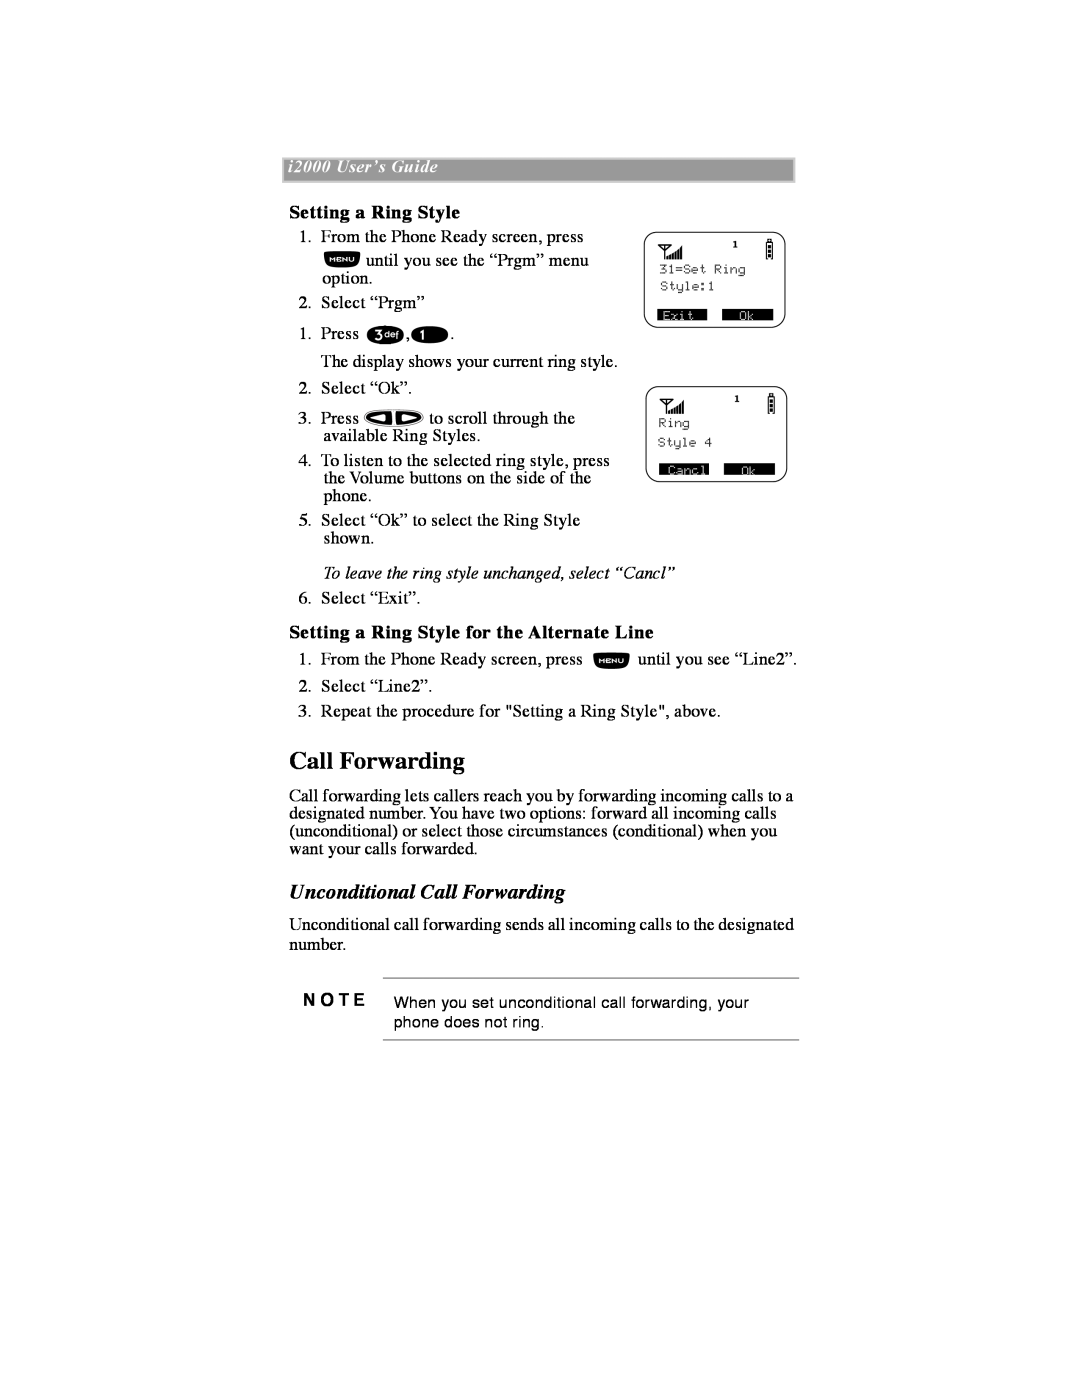 Motorola iDEN manual Unconditional Call Forwarding, Setting a Ring Style for the Alternate Line, i2000 UserÕs Guide 